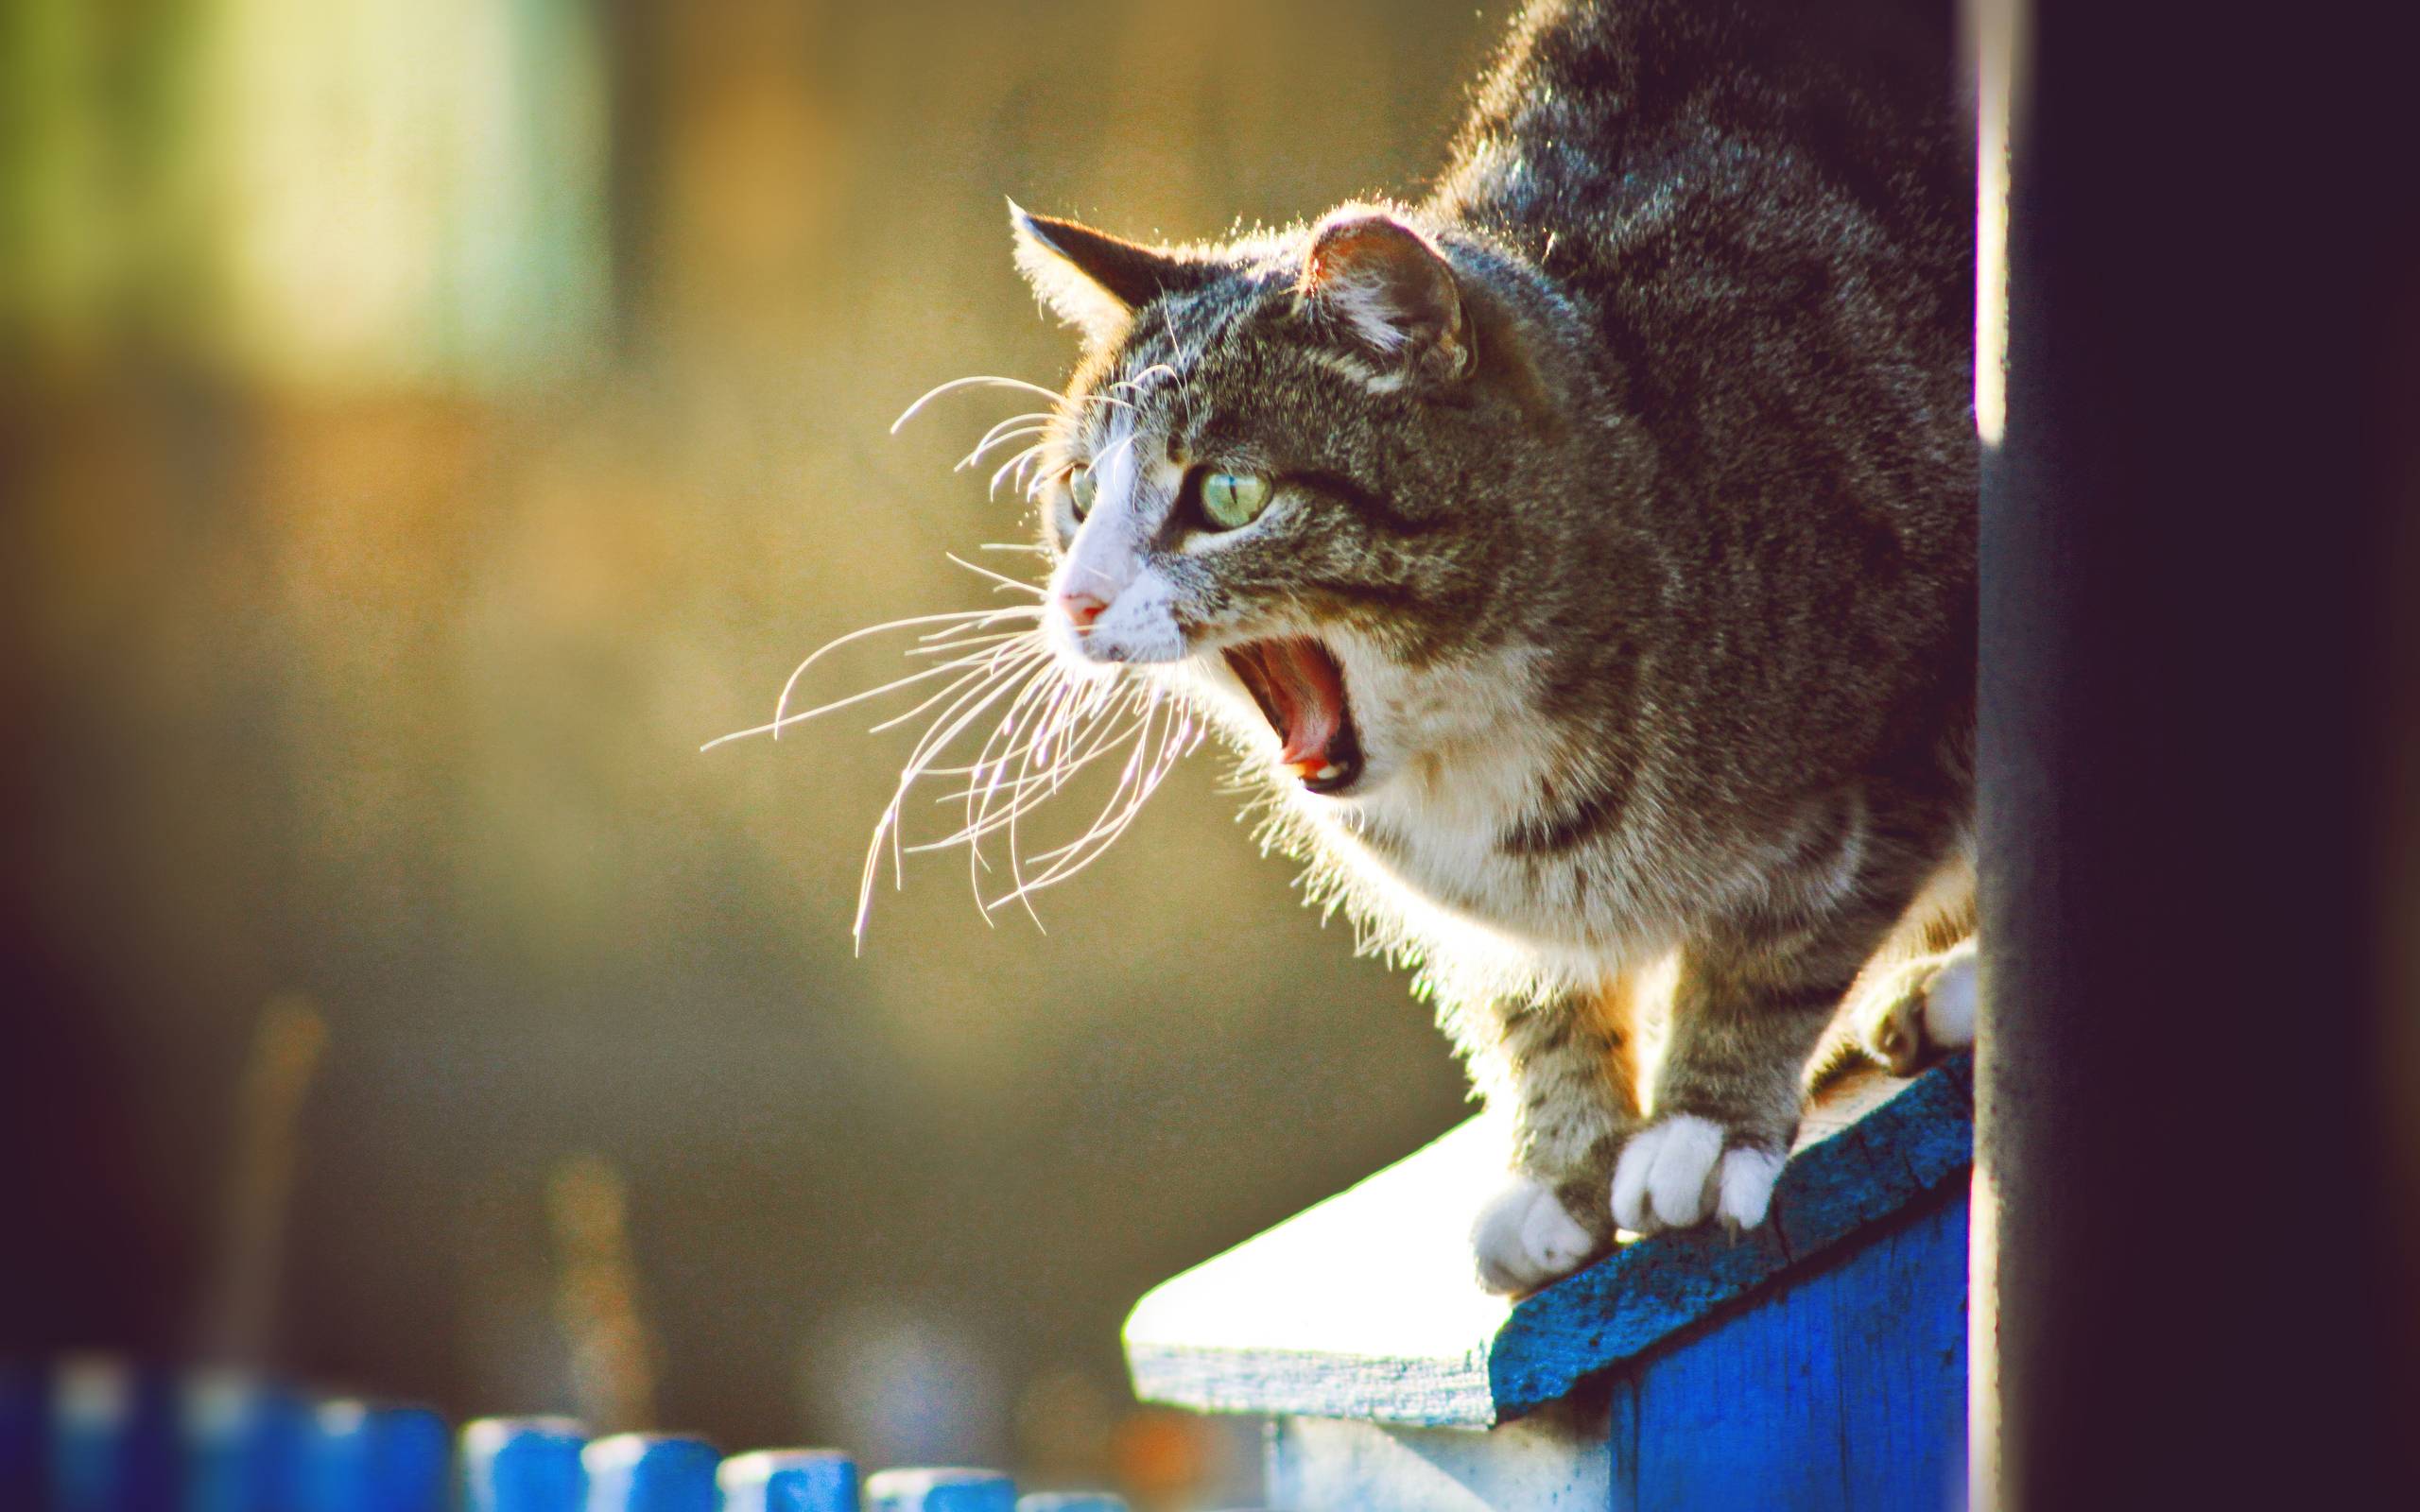 Wallpapers cat yawning muzzle on the desktop